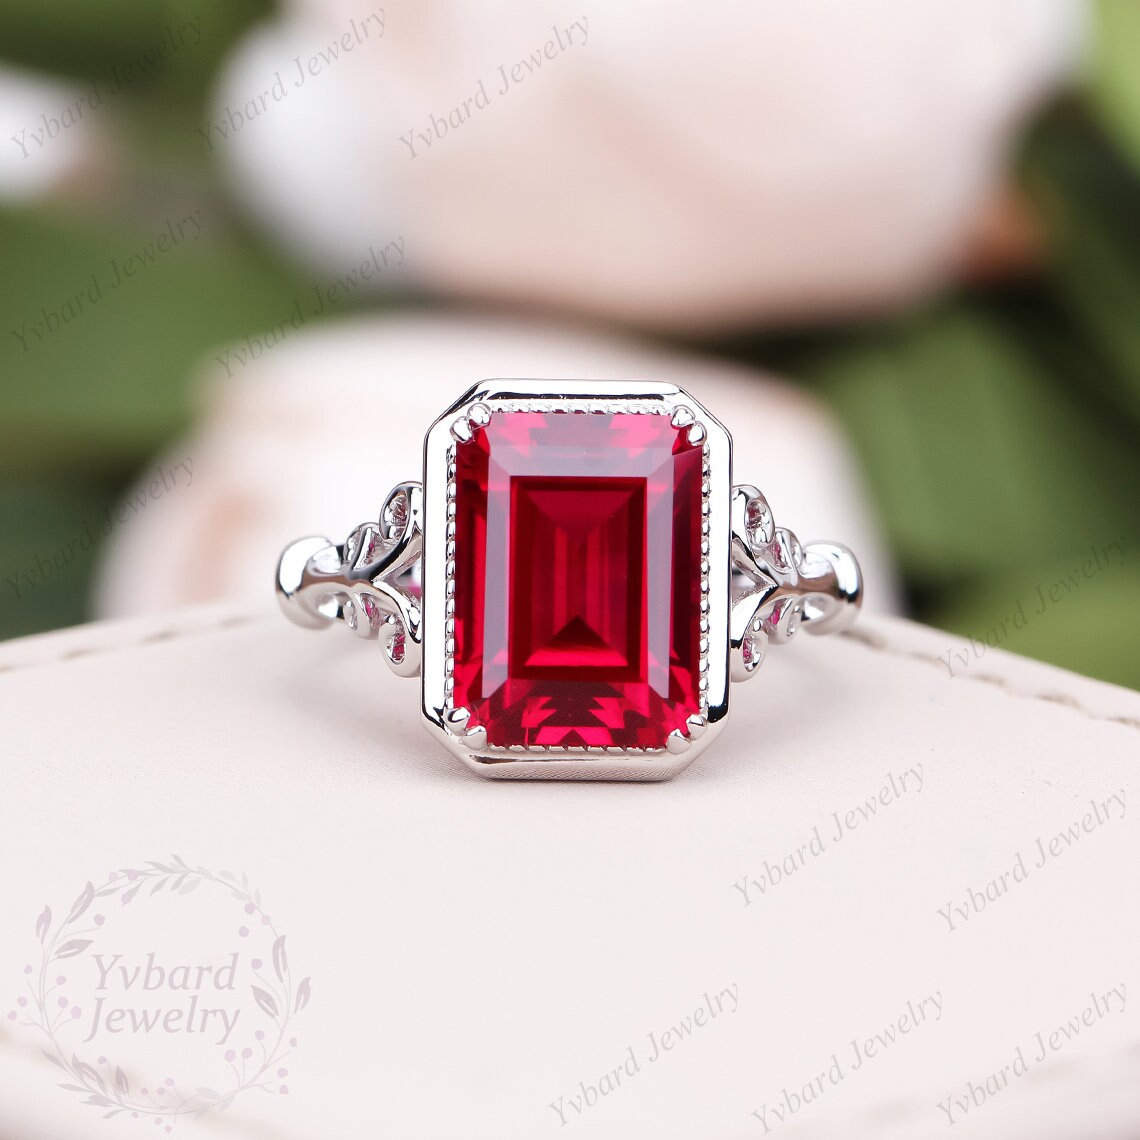 Buy 925 Sterling Silver Oval Red Ruby and American Diamond Princess Cut Ring  for Women Girls online